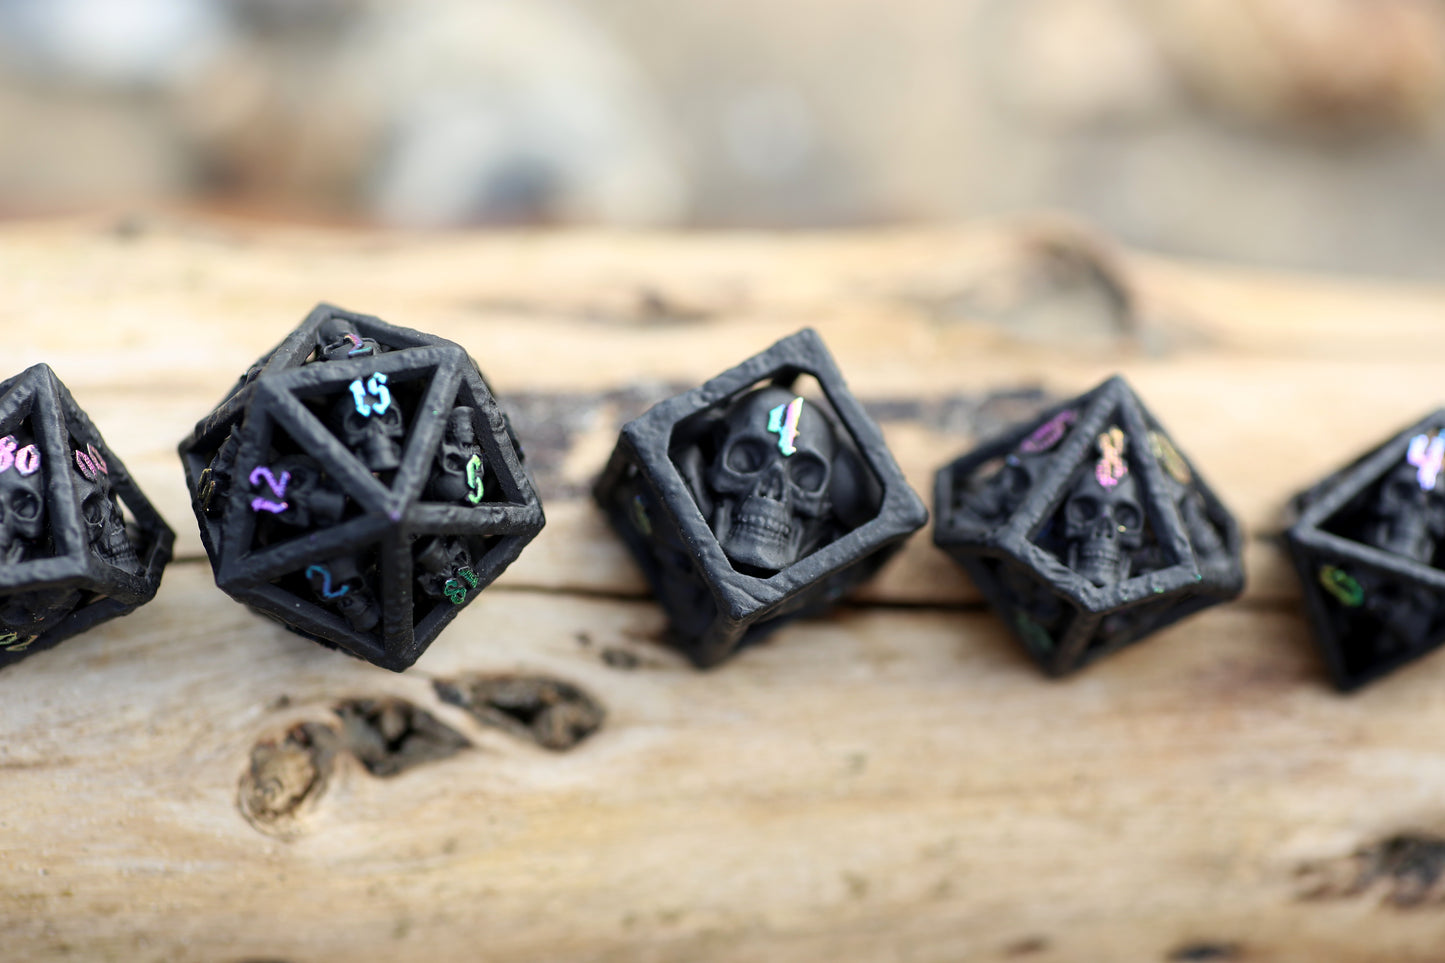 Black with Chromatic Skull's Grin Hollow Metal Dice